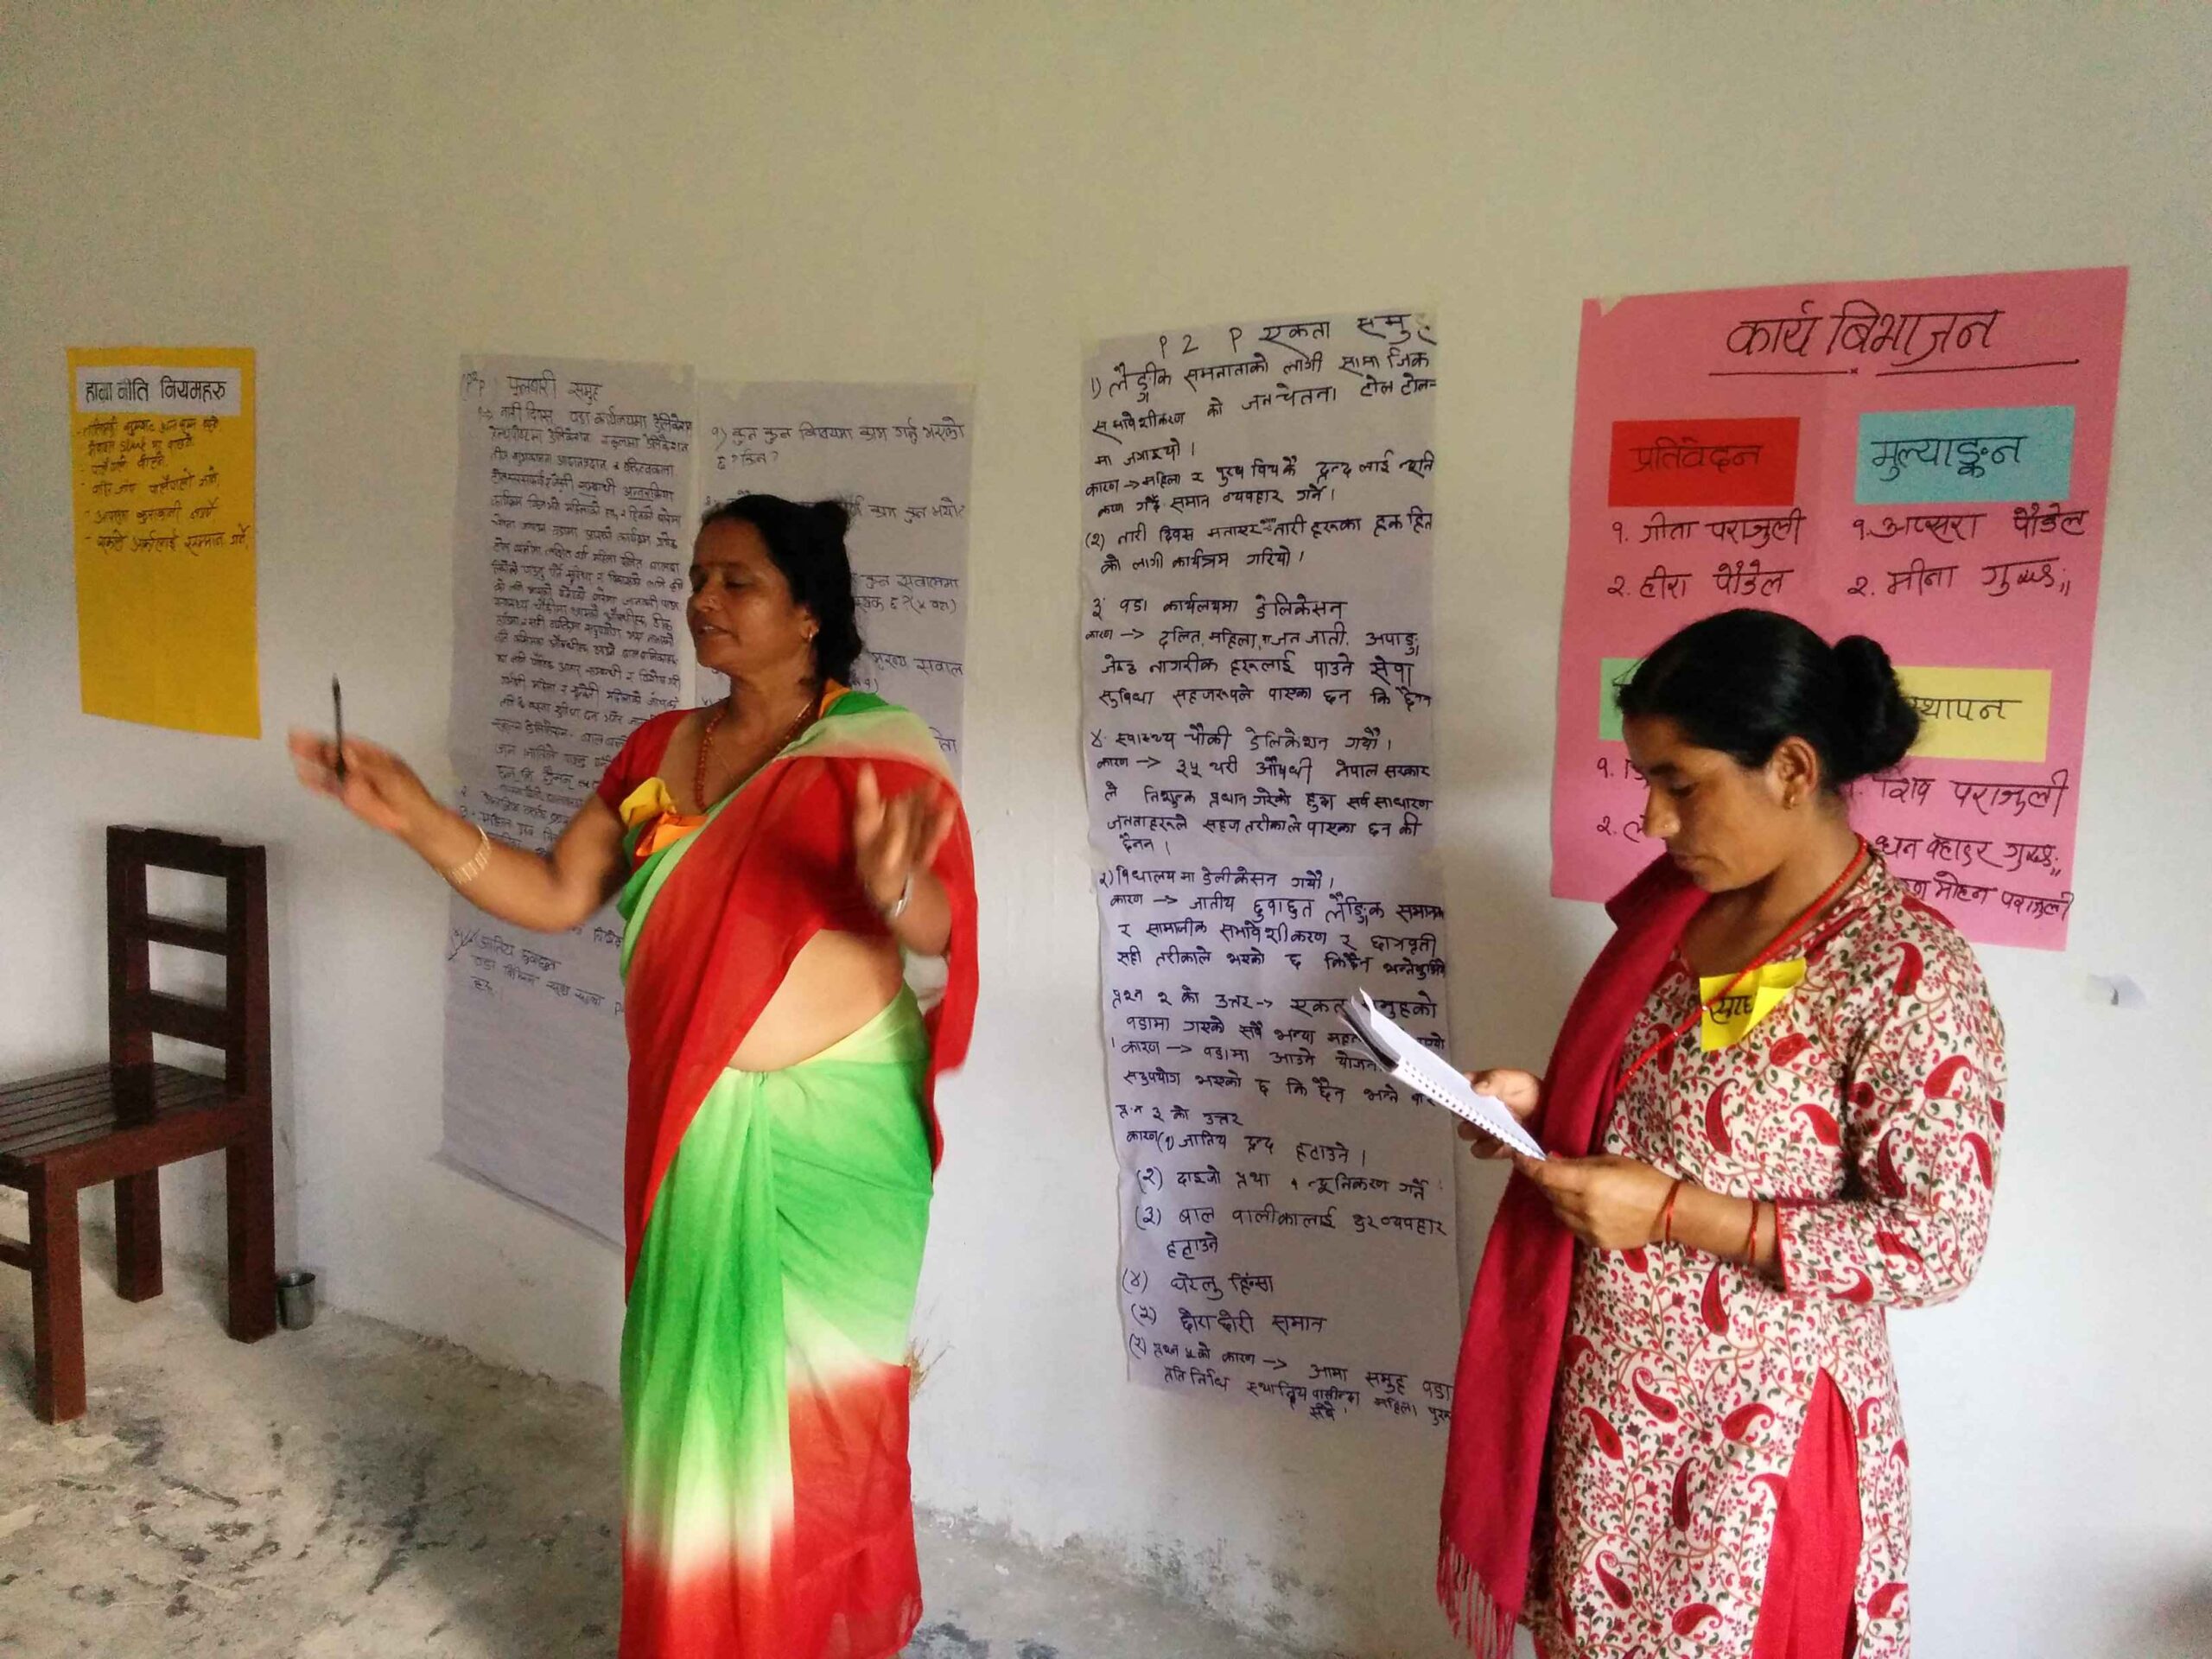 B. Capacity Building Project for Elected Women Representatives and Functionaries (2017-Ongoing) – Municipal Governments